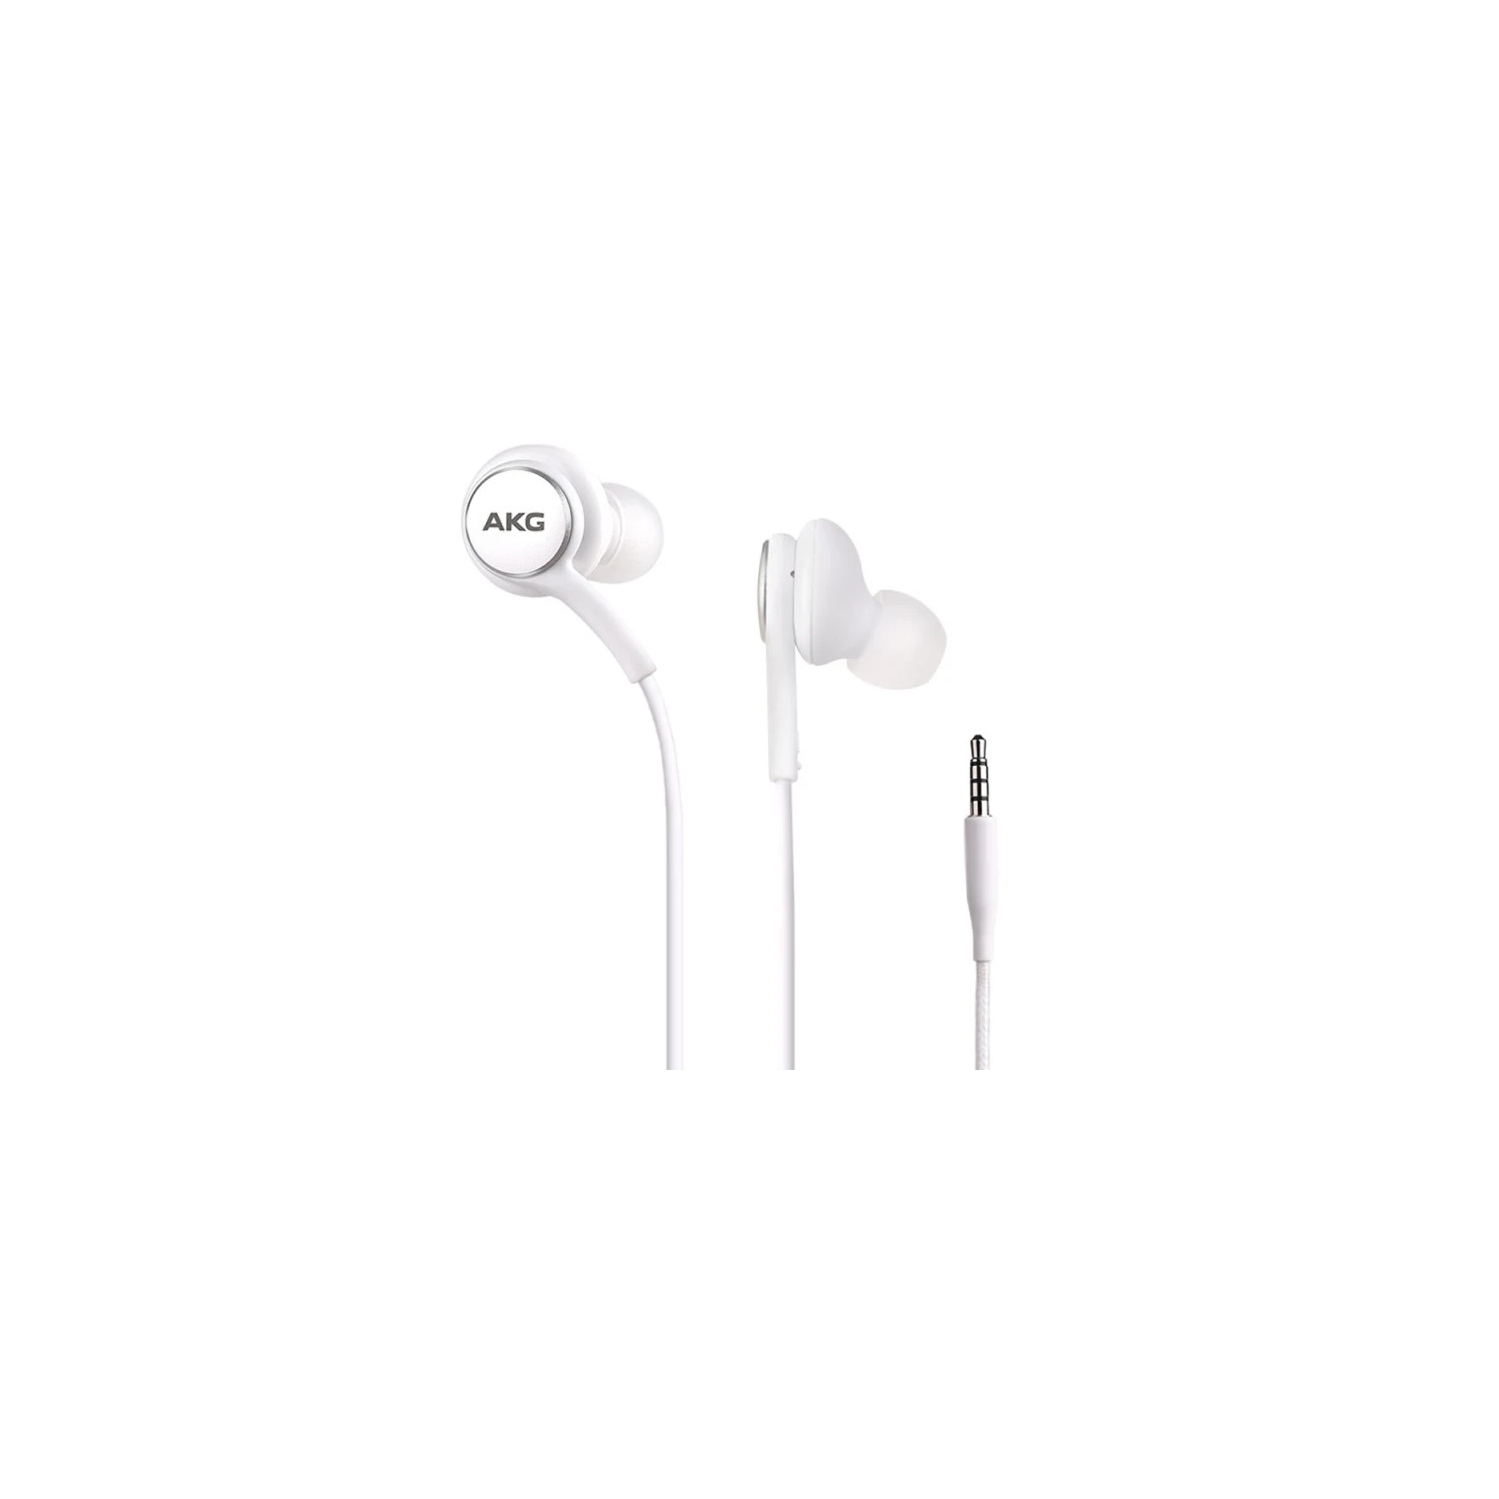 AKG Stereo Headsets Headphones Earphones & Mic for Samsung Galaxy S8 S9 S10 Plus Note 8 9 10, White